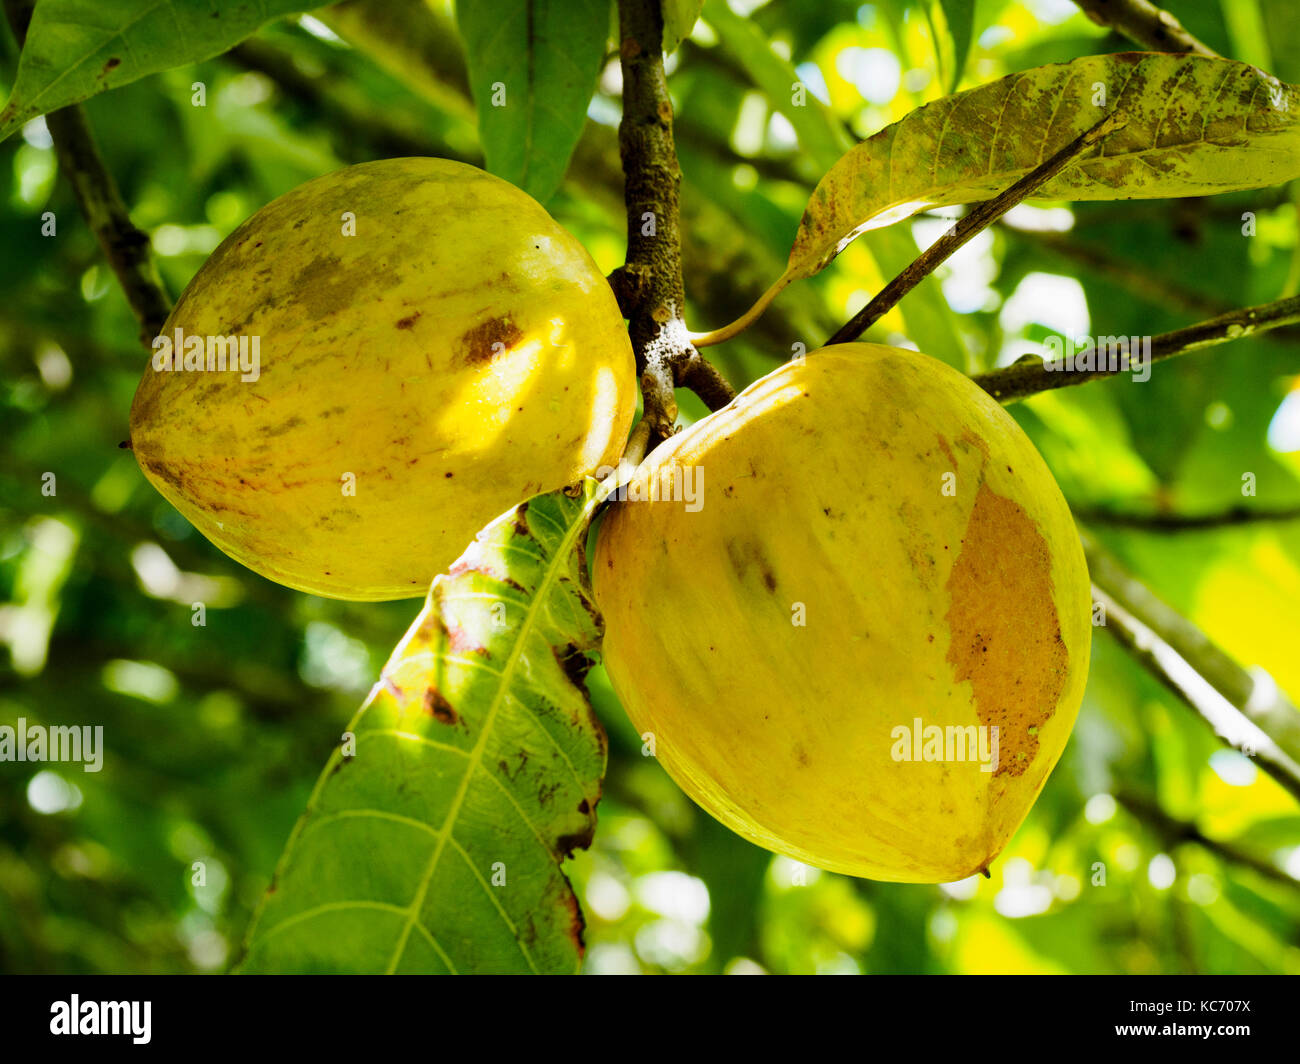 Yellow sapote fruits hanging on tree Stock Photo